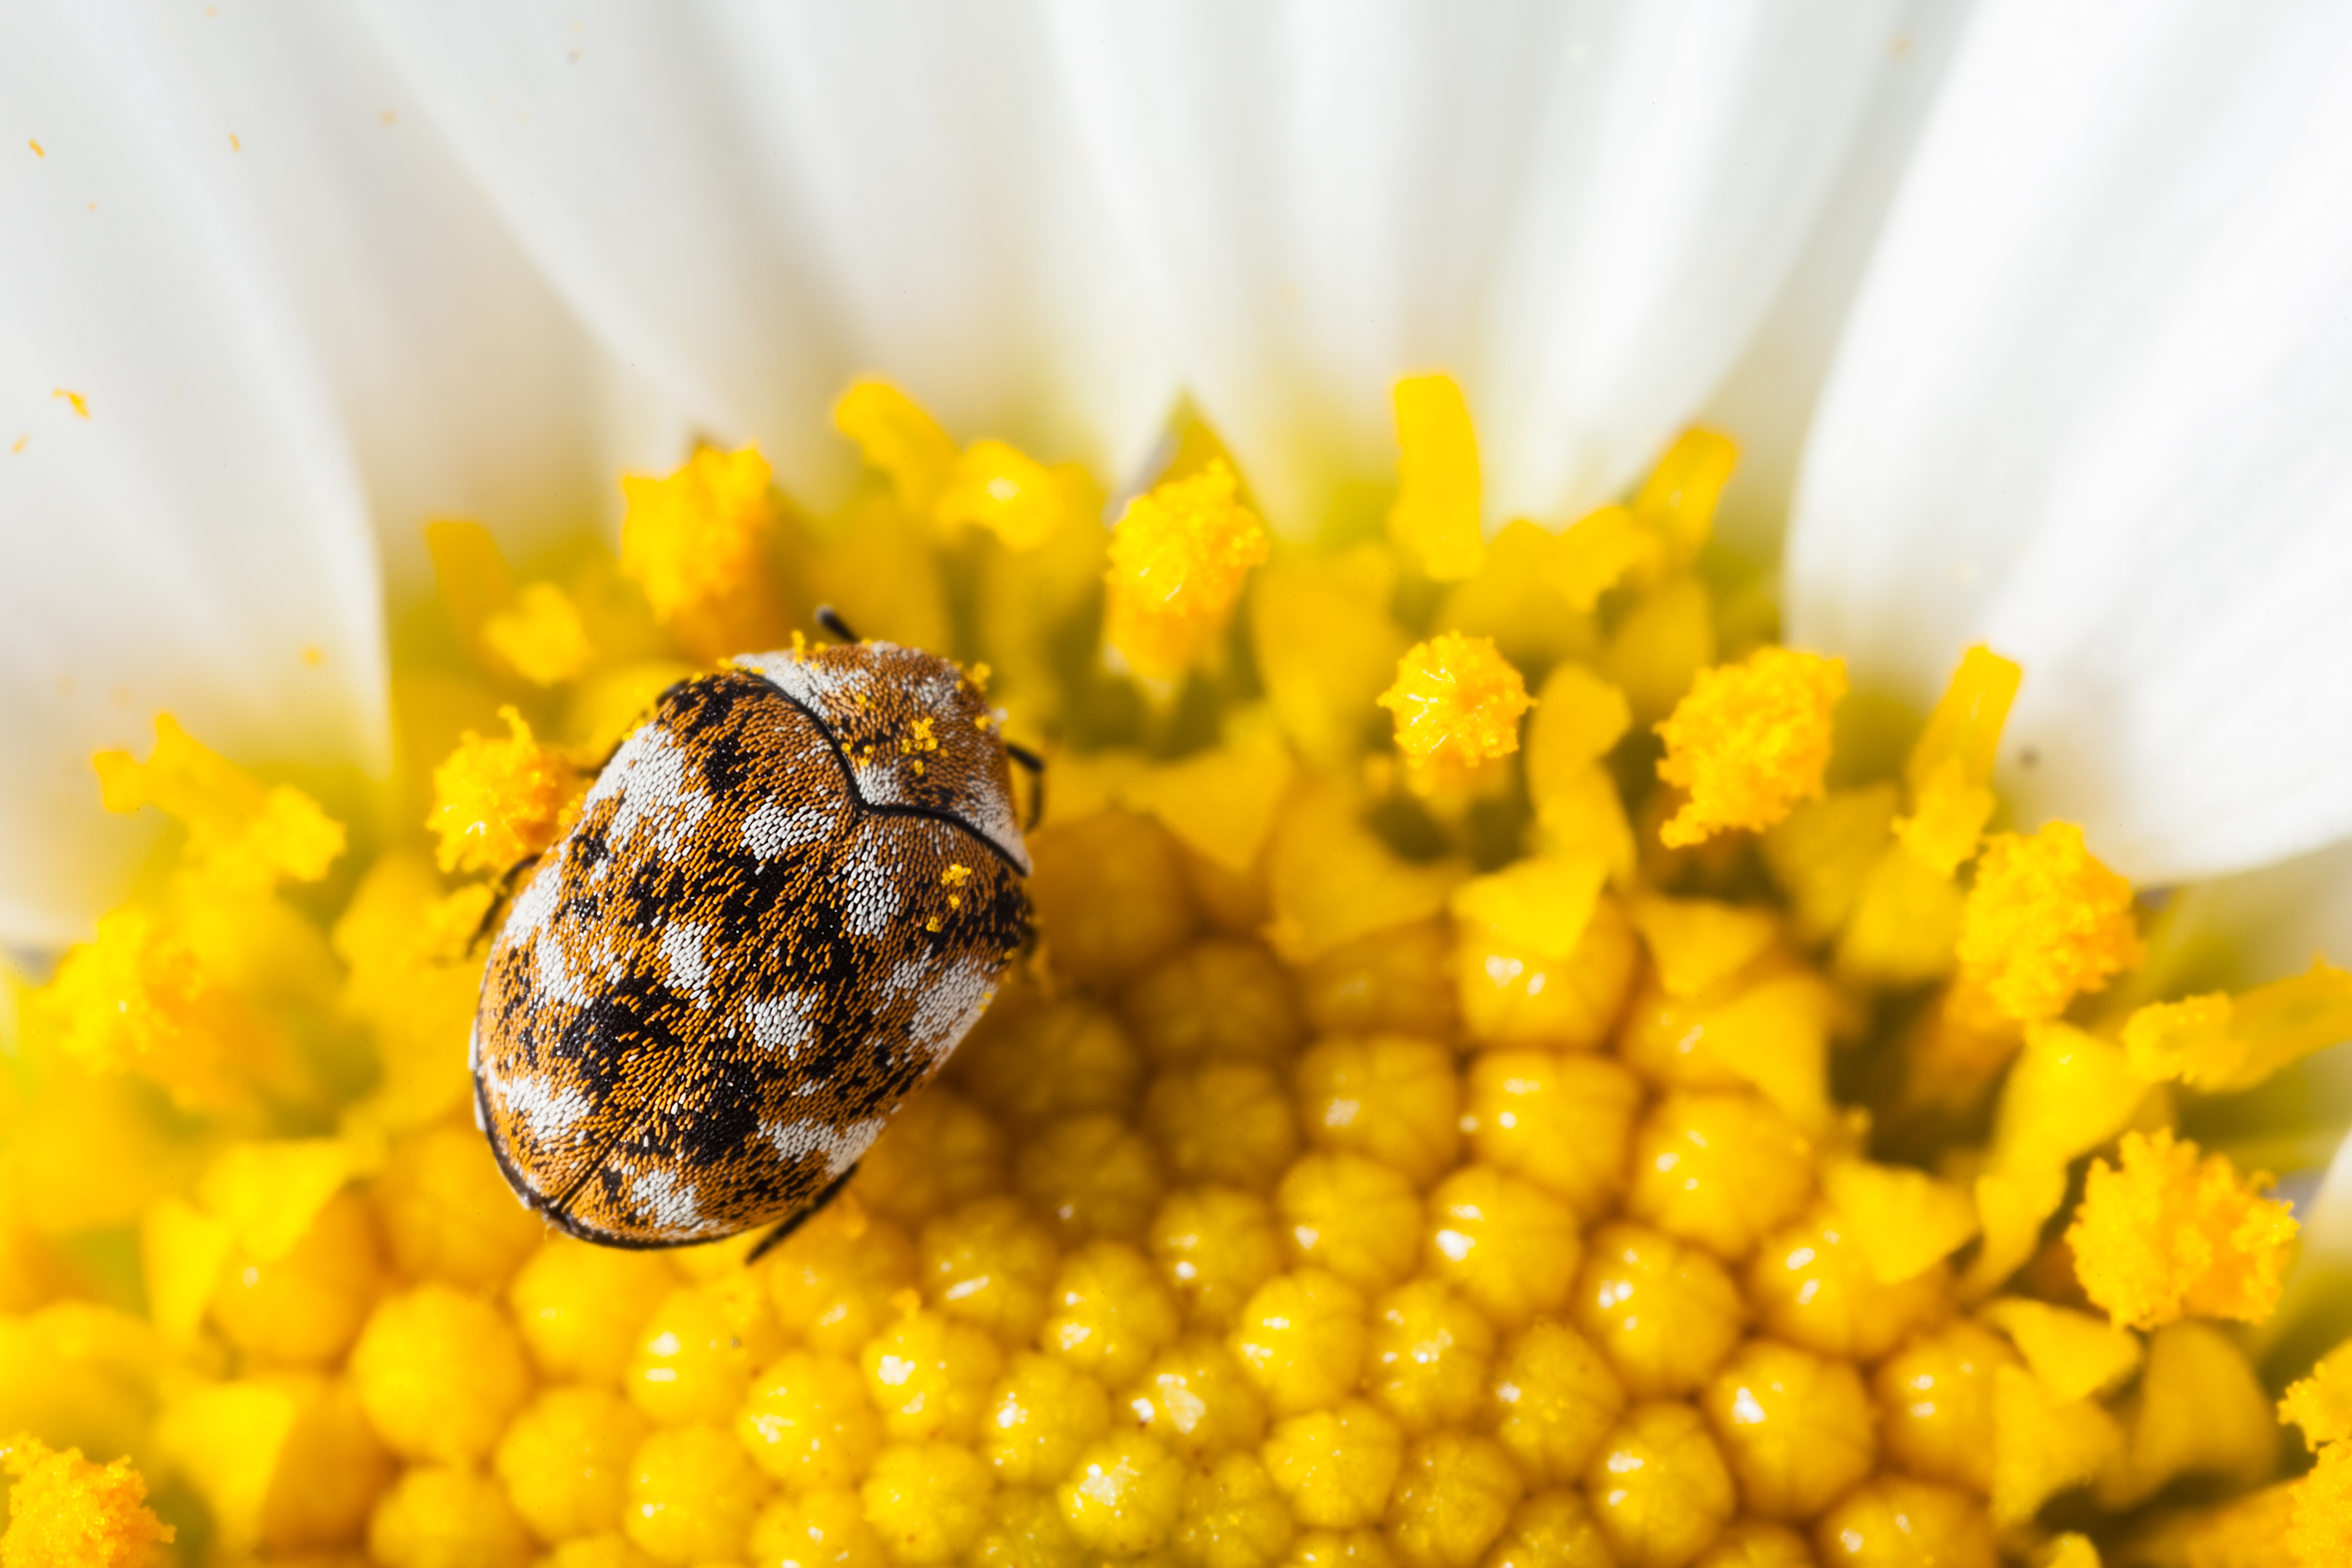 How to Get Rid of Carpet Beetles by Finding the Source